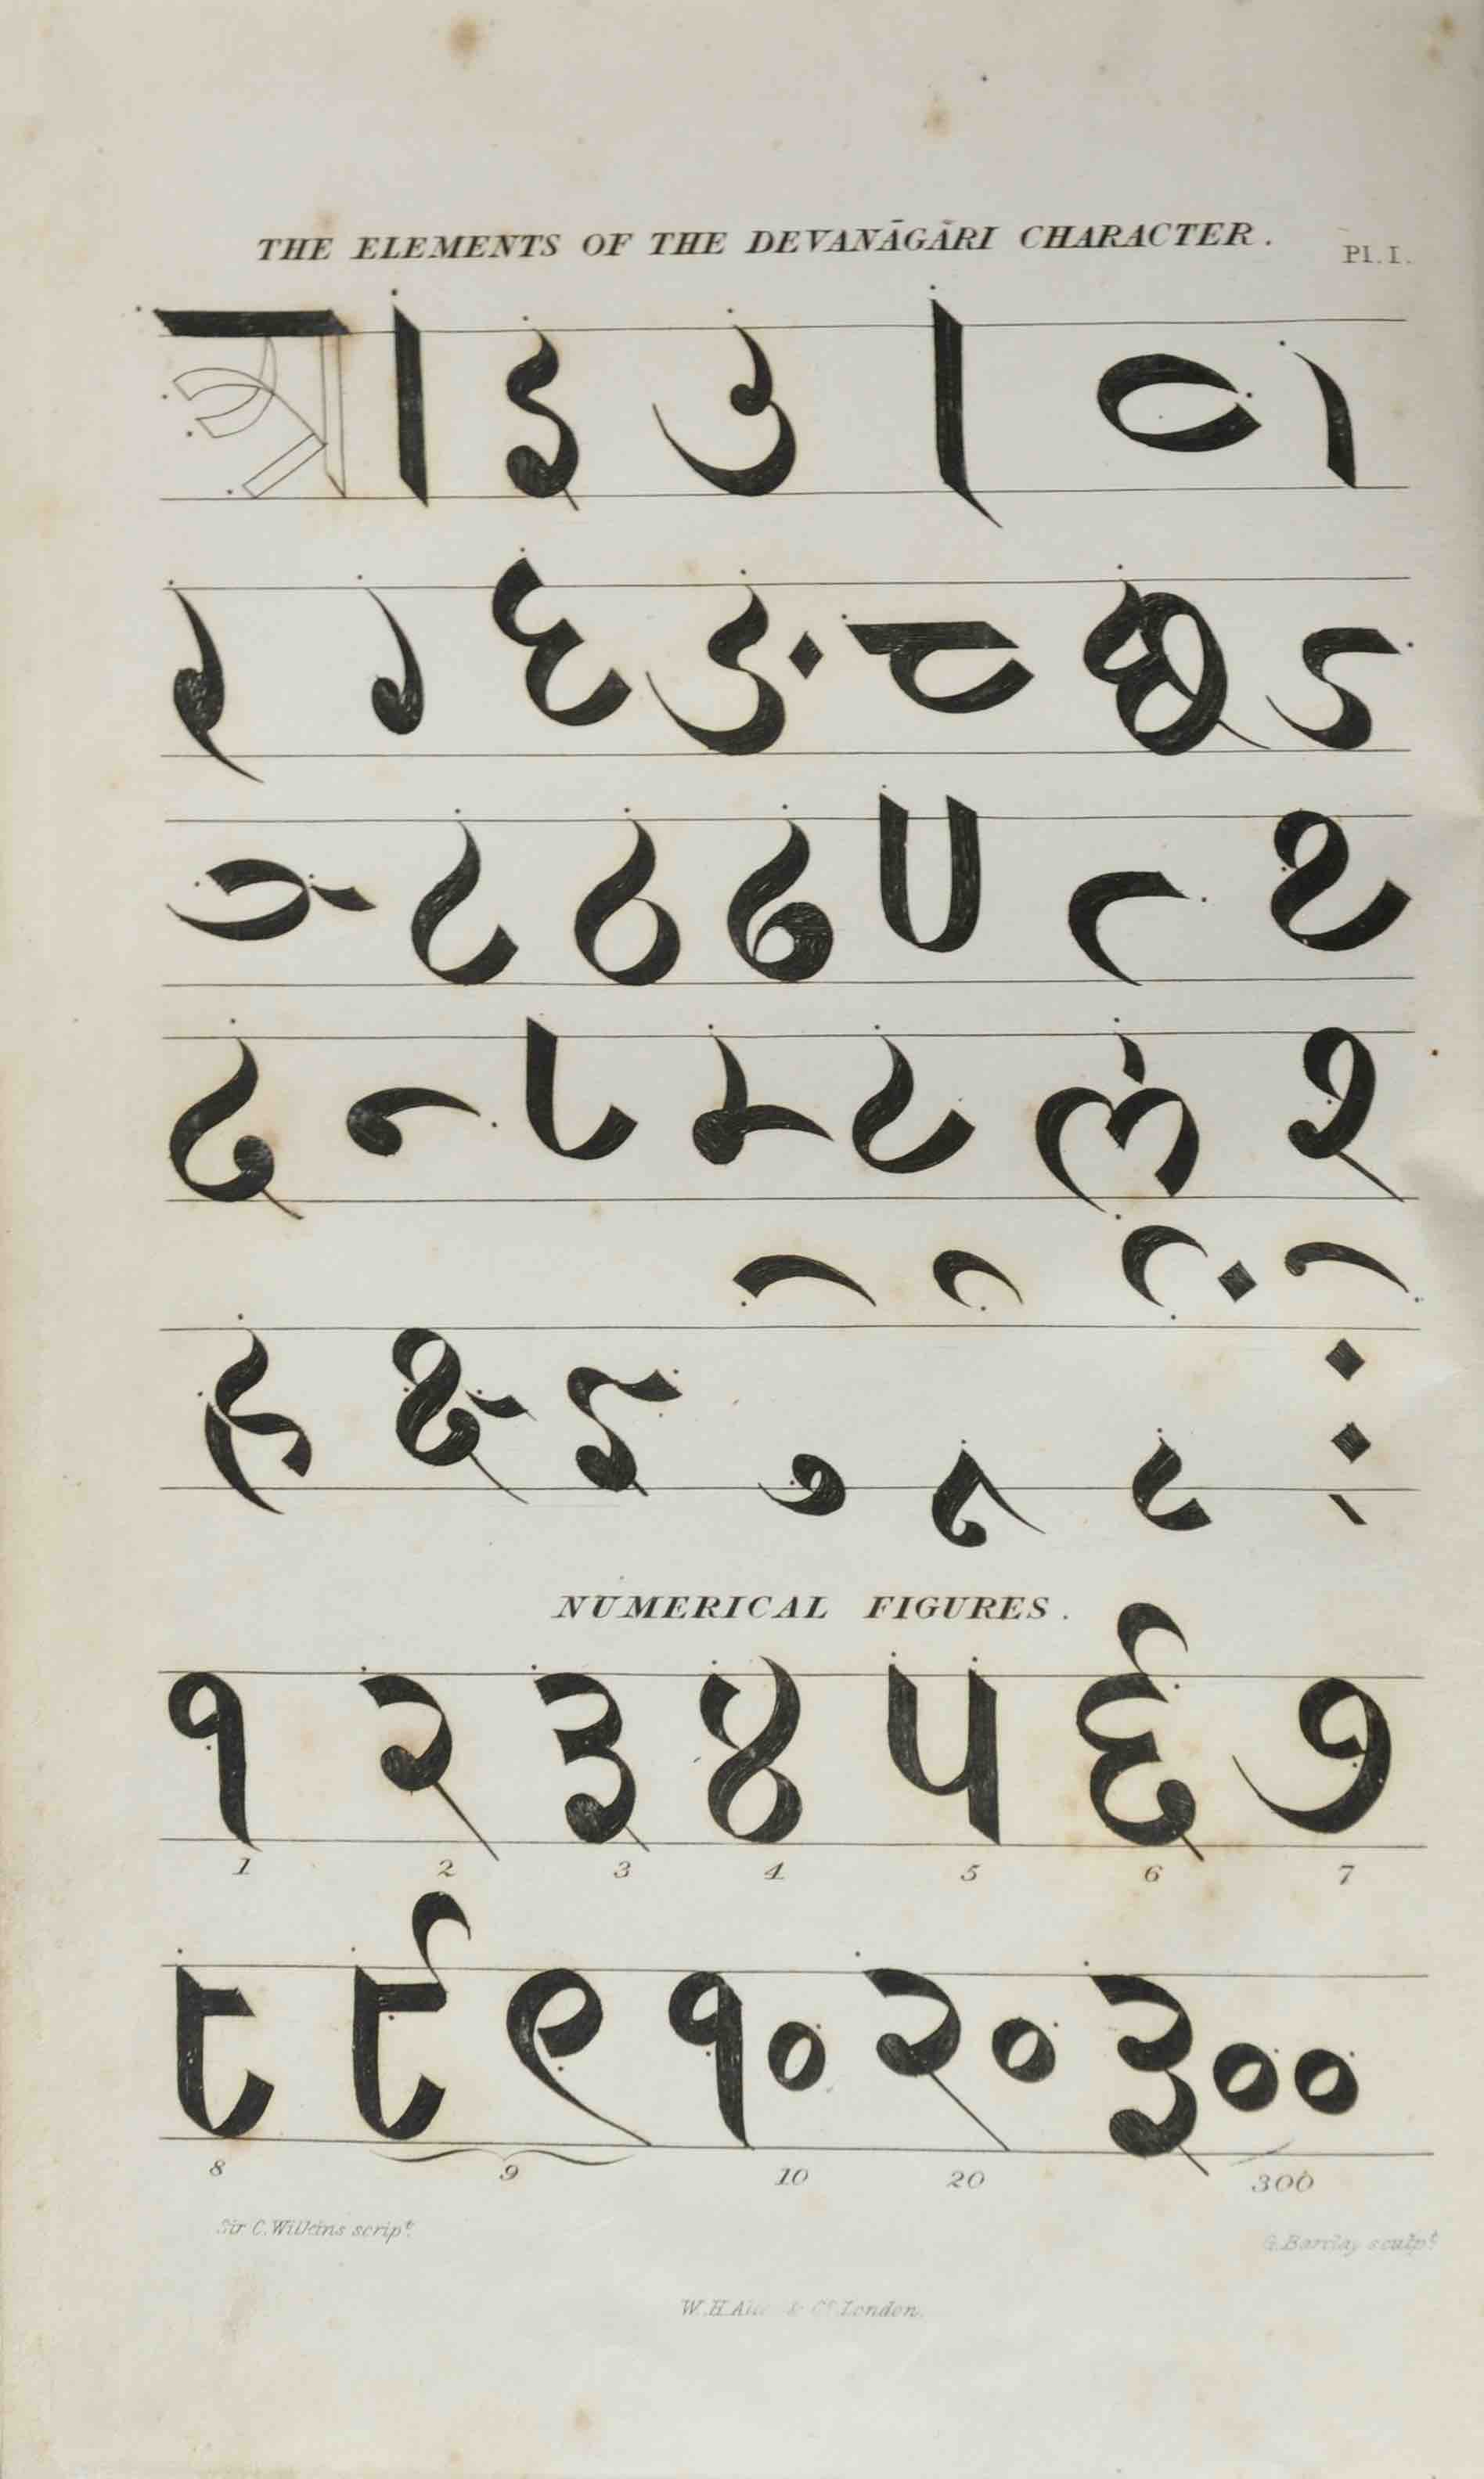 FORBES, DUNCAN: -  A Grammar of the Hindustani Language, in the Oriental and Roman Character. ... To which is added, a copious selection of easy extracts for reading in the Persi-Araic & Devanagari characters, forming a complete introduction to the Bagh-o-Bahar. London 1846.